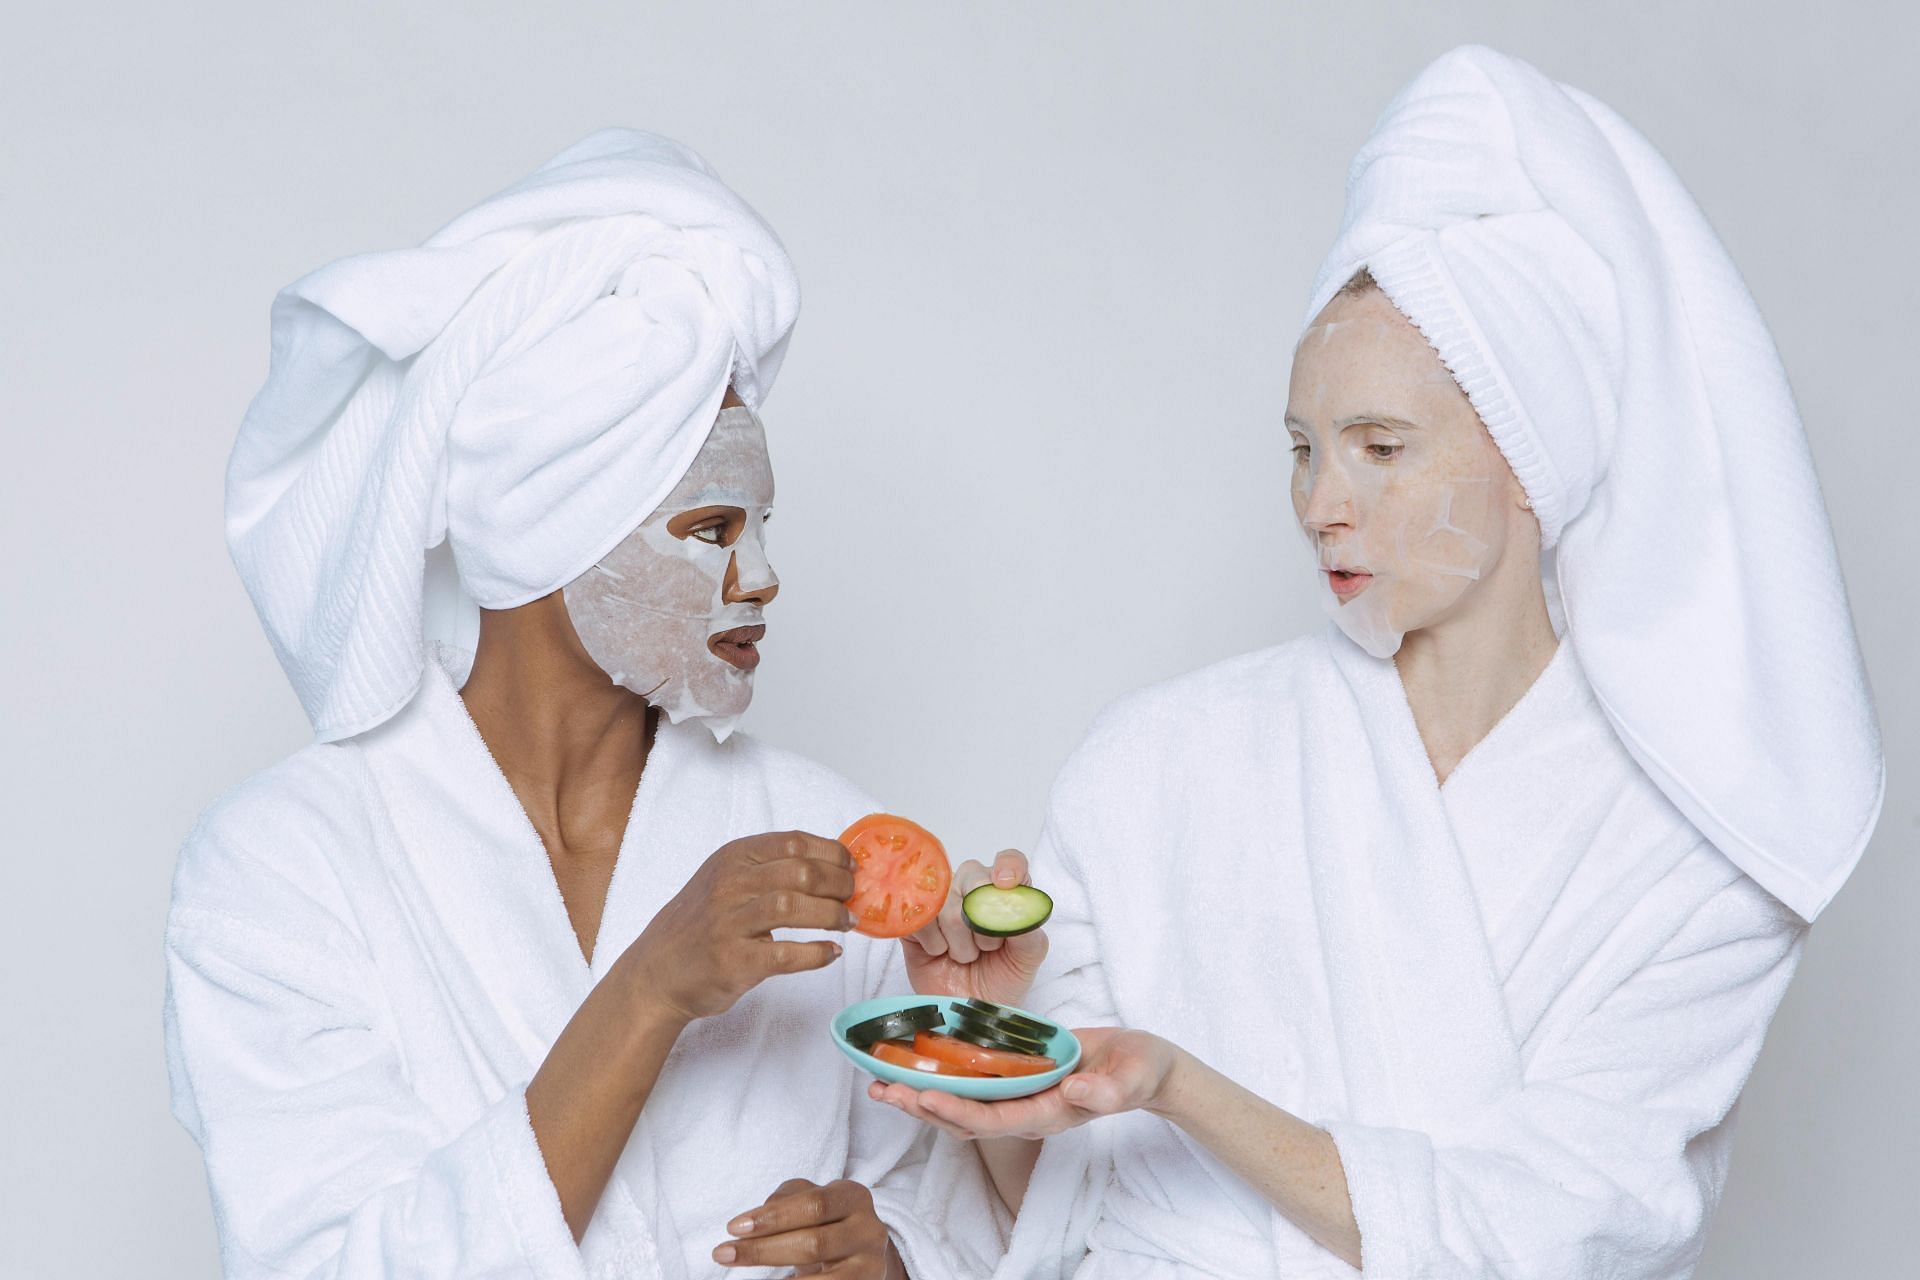 Tips to use a face mask (image sourced via Pexels / Photo by angela)